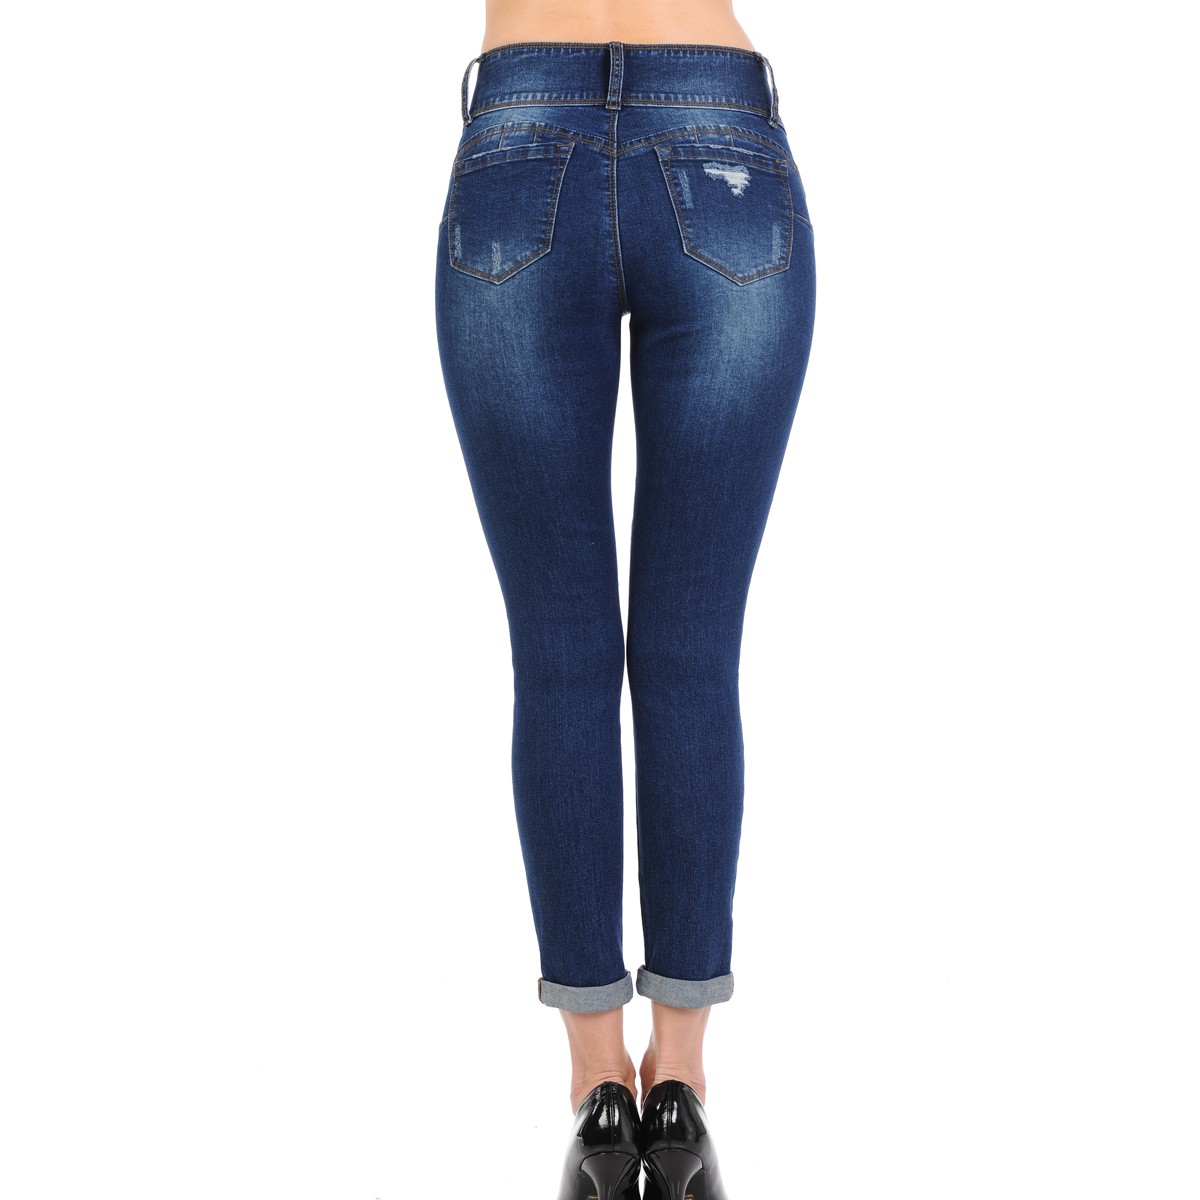 Juniors' 3-Button Push Up Crop Jeans - image 2 of 2